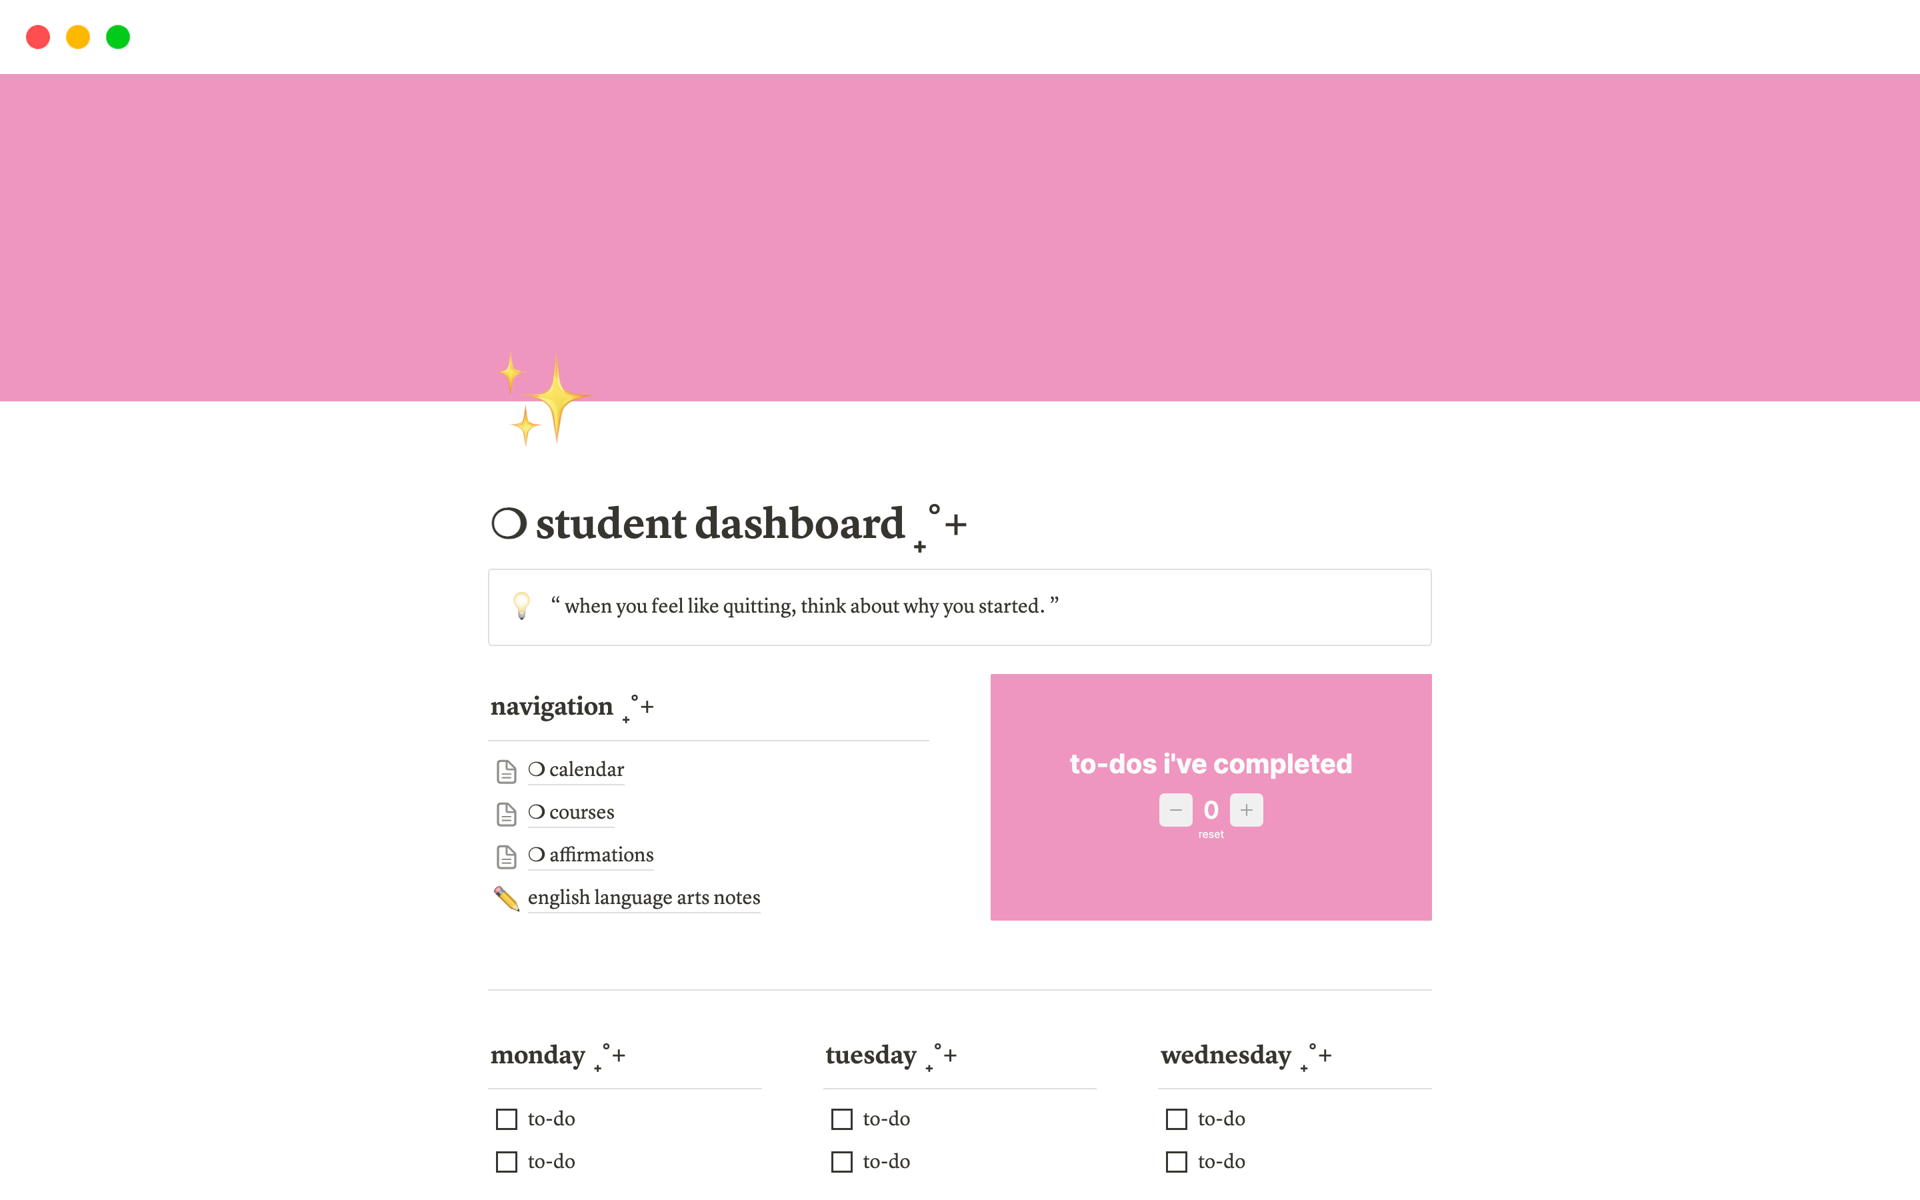 A template preview for student dashboard